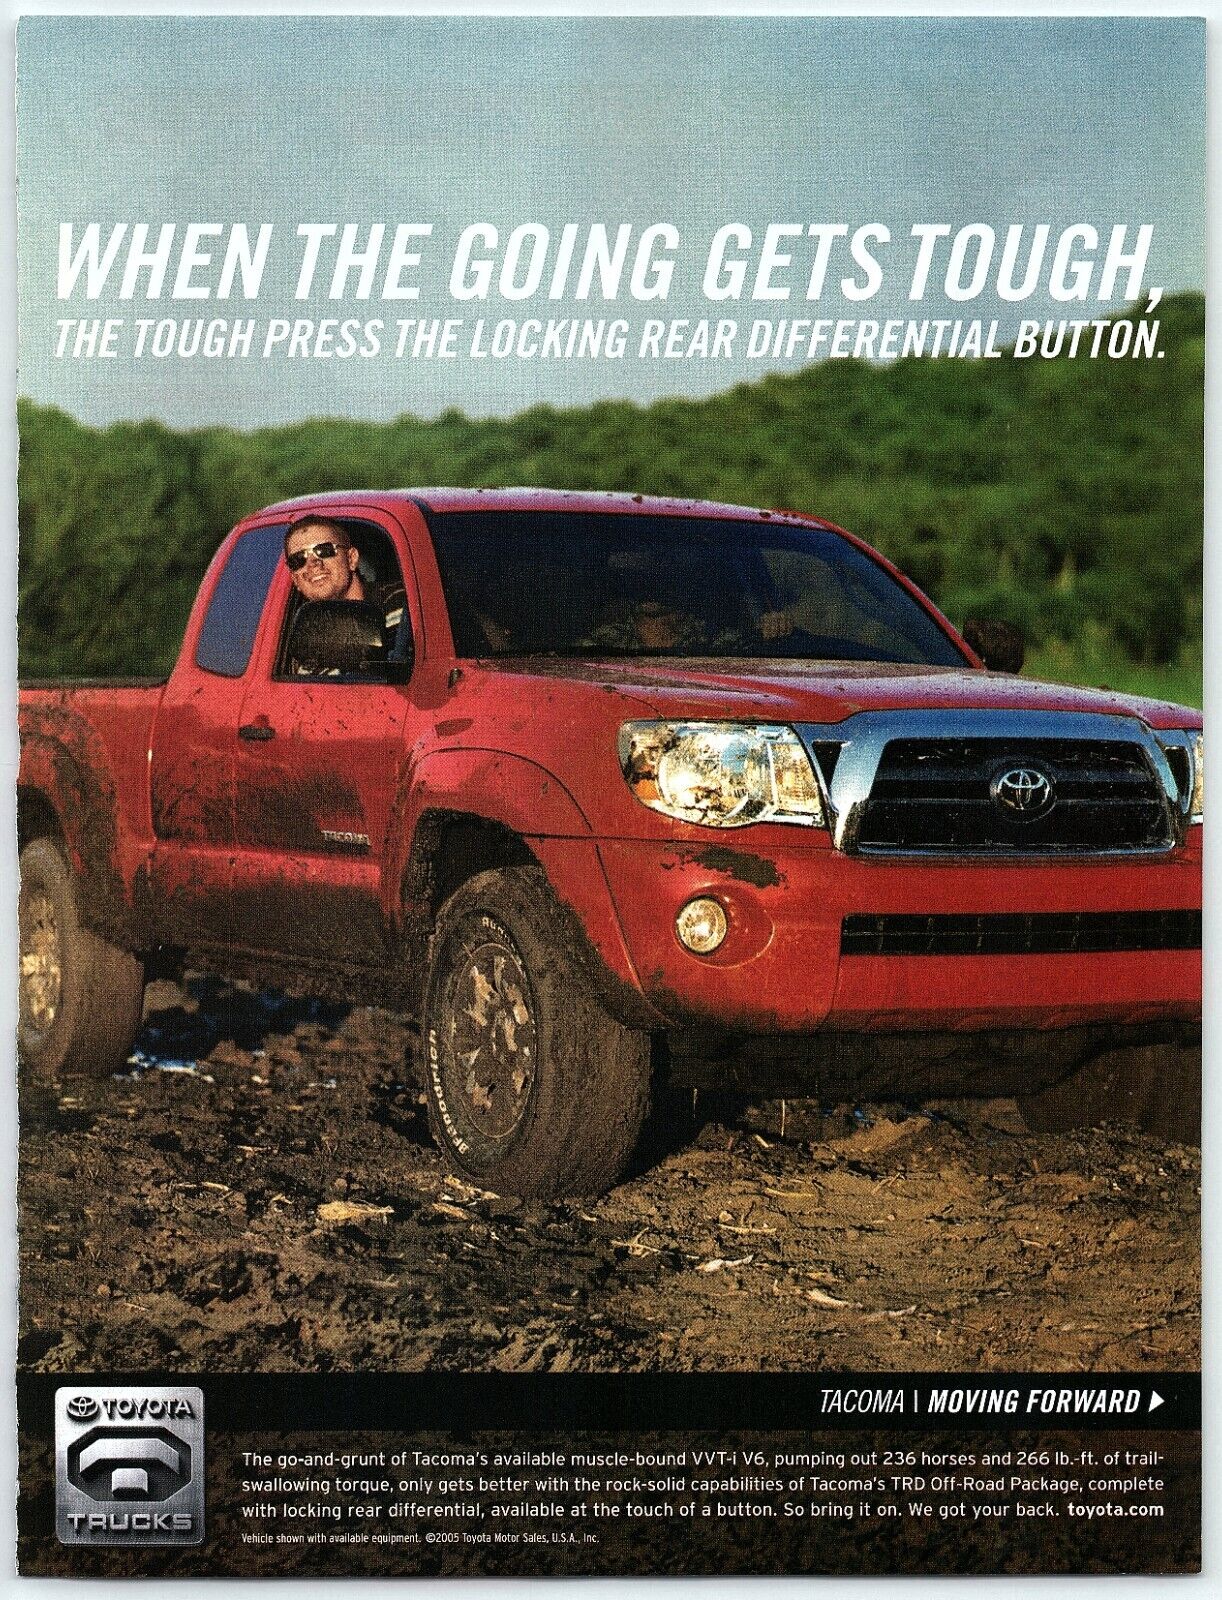 2005 TOYOTA TACOMA DOUBLE CAB TRD OFF ROAD WHEN GOING GETS TOUGH PRINT AD Z3535